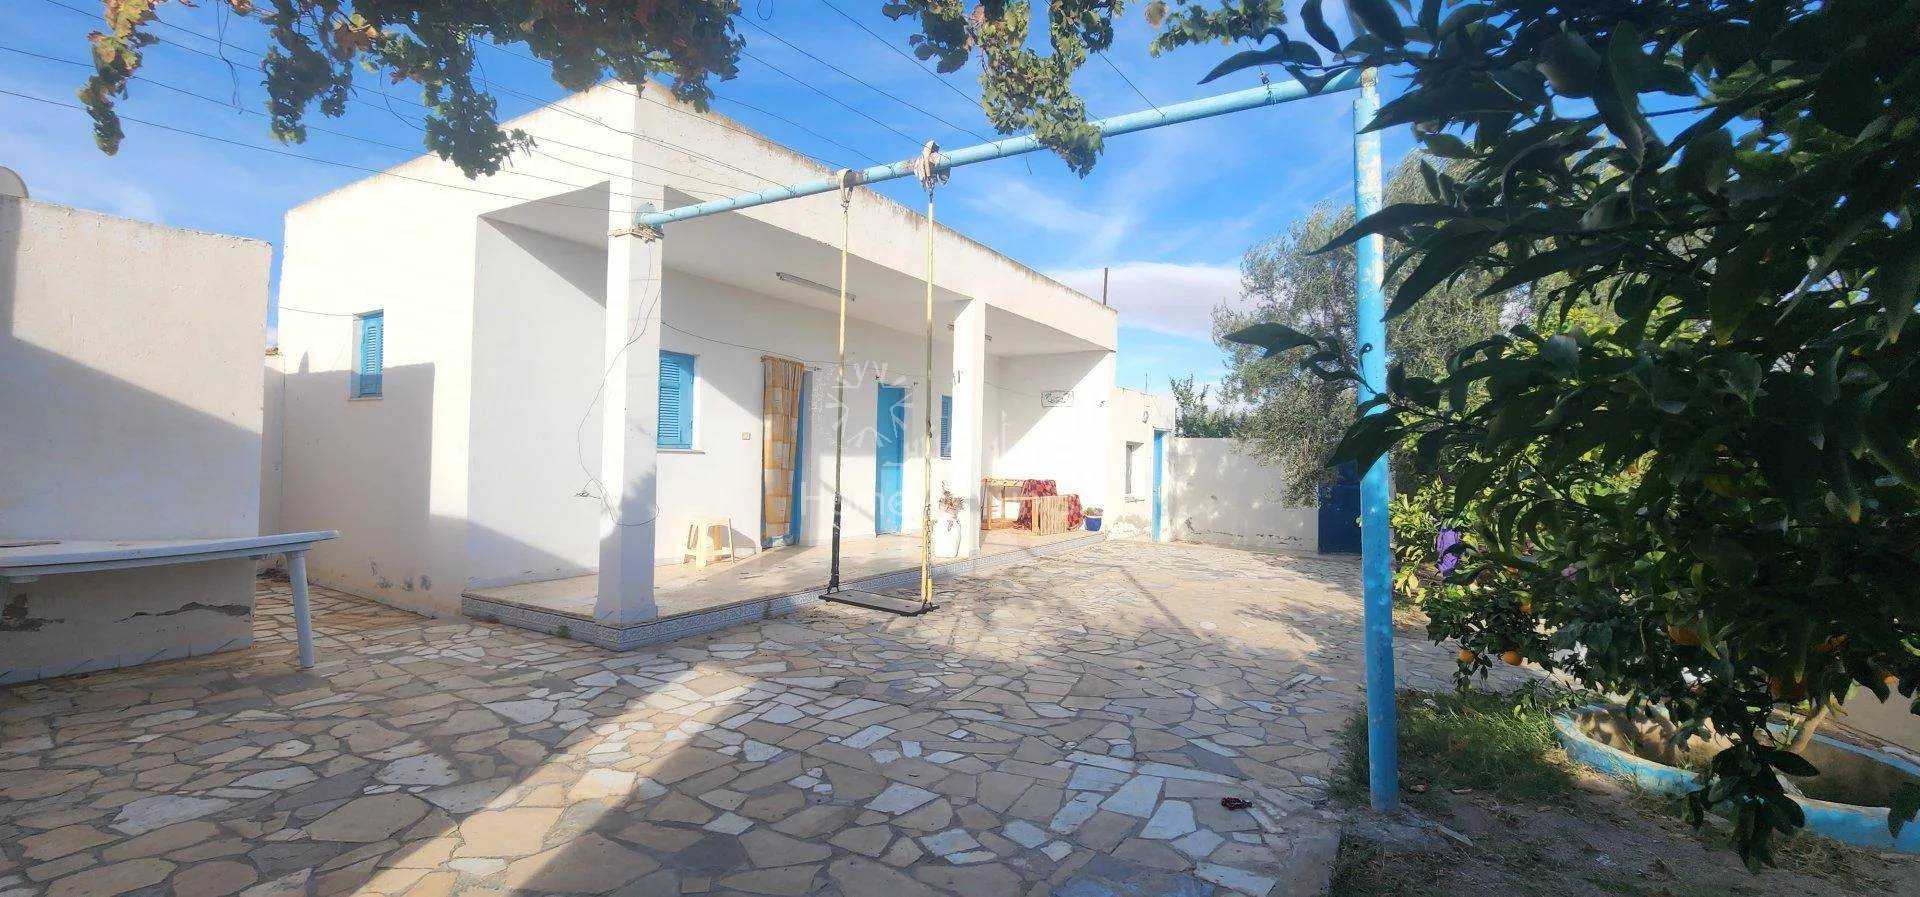 House in Dar ech Chaouch Abd Alla, Sousse 11286134